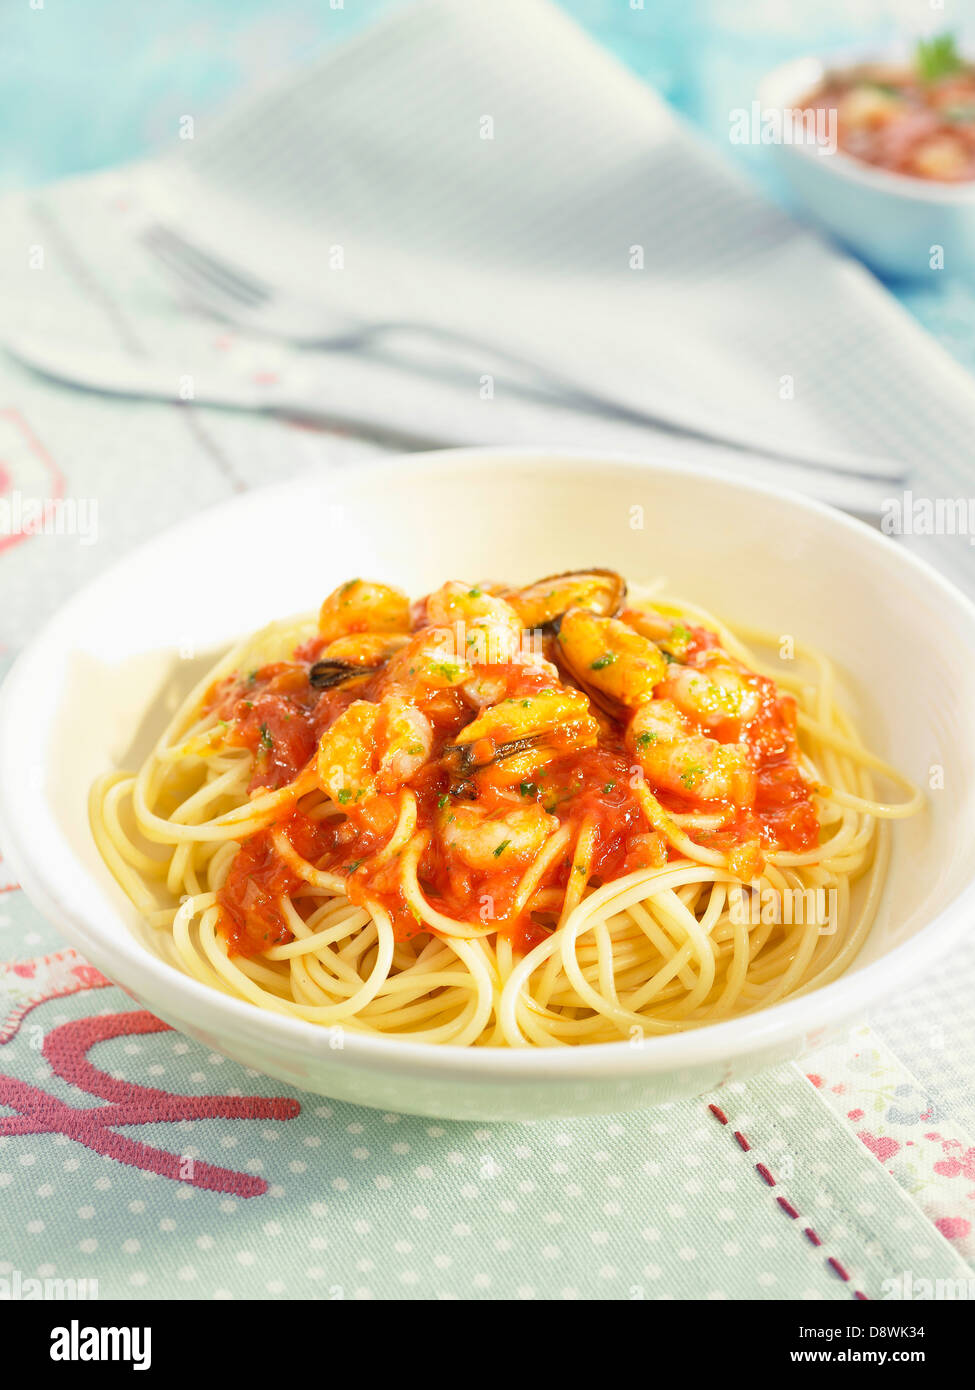 Spaghetti with shrimps,mussels and tomato sauce Stock Photo